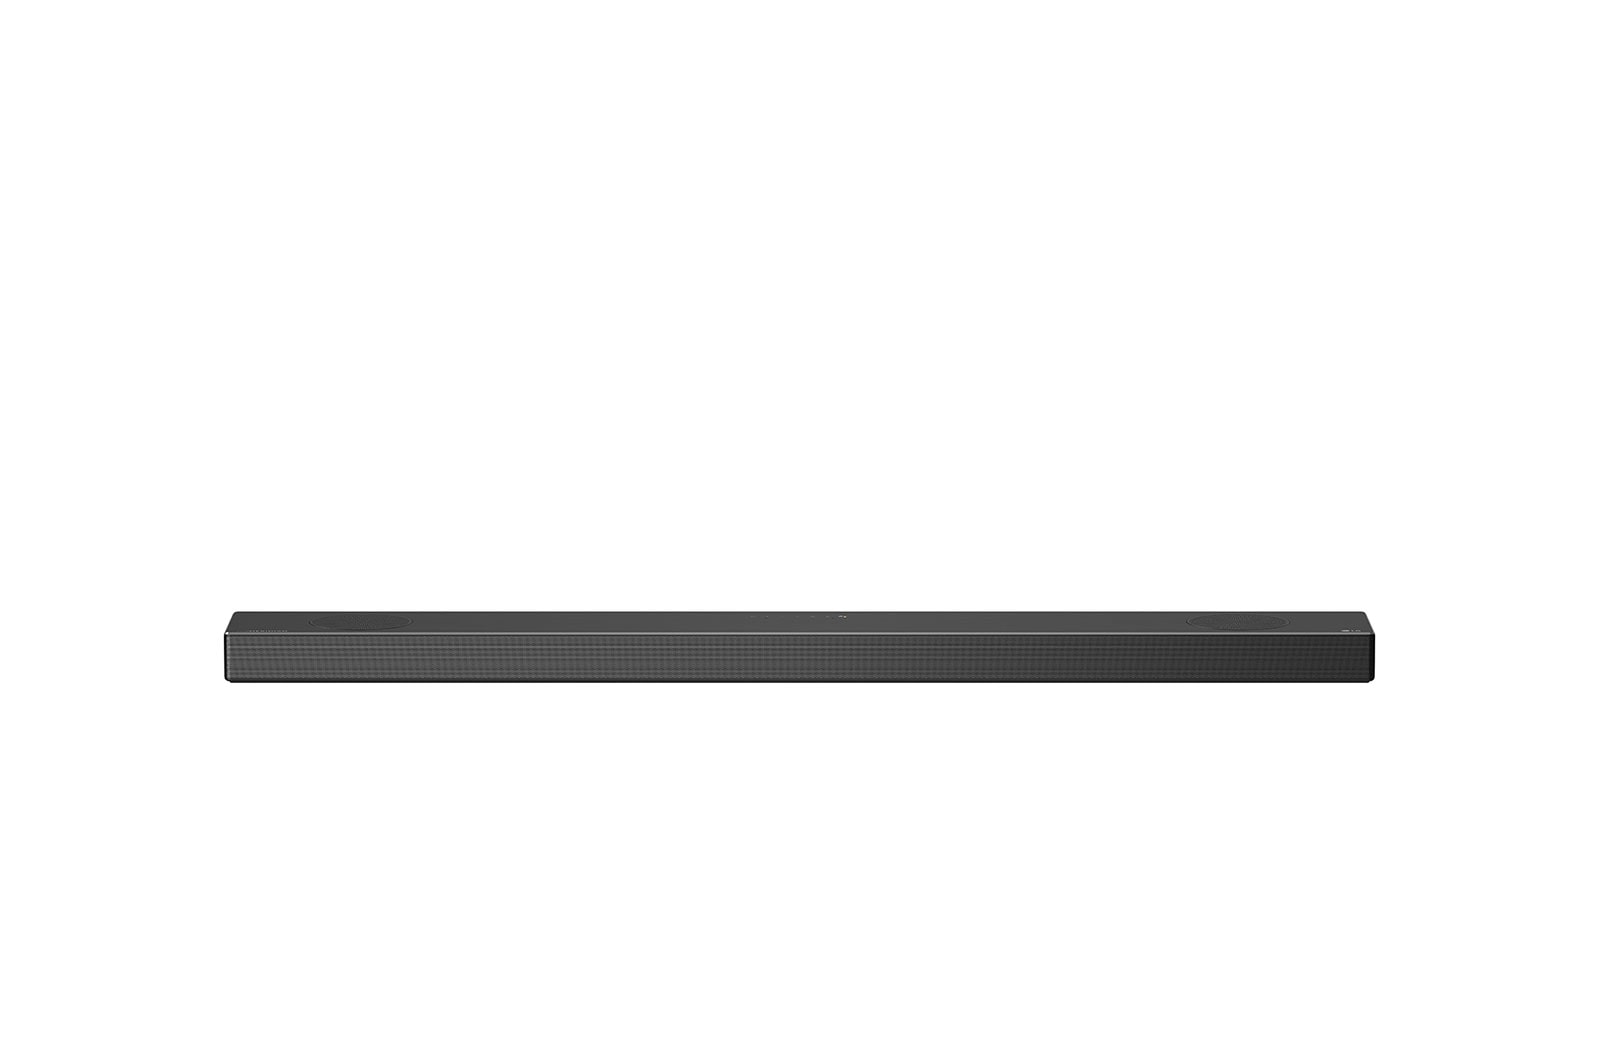 LG SN9YG 5.1.2 Channel High Res Audio Sound Bar with Dolby Atmos® and Google Assistant Built-In